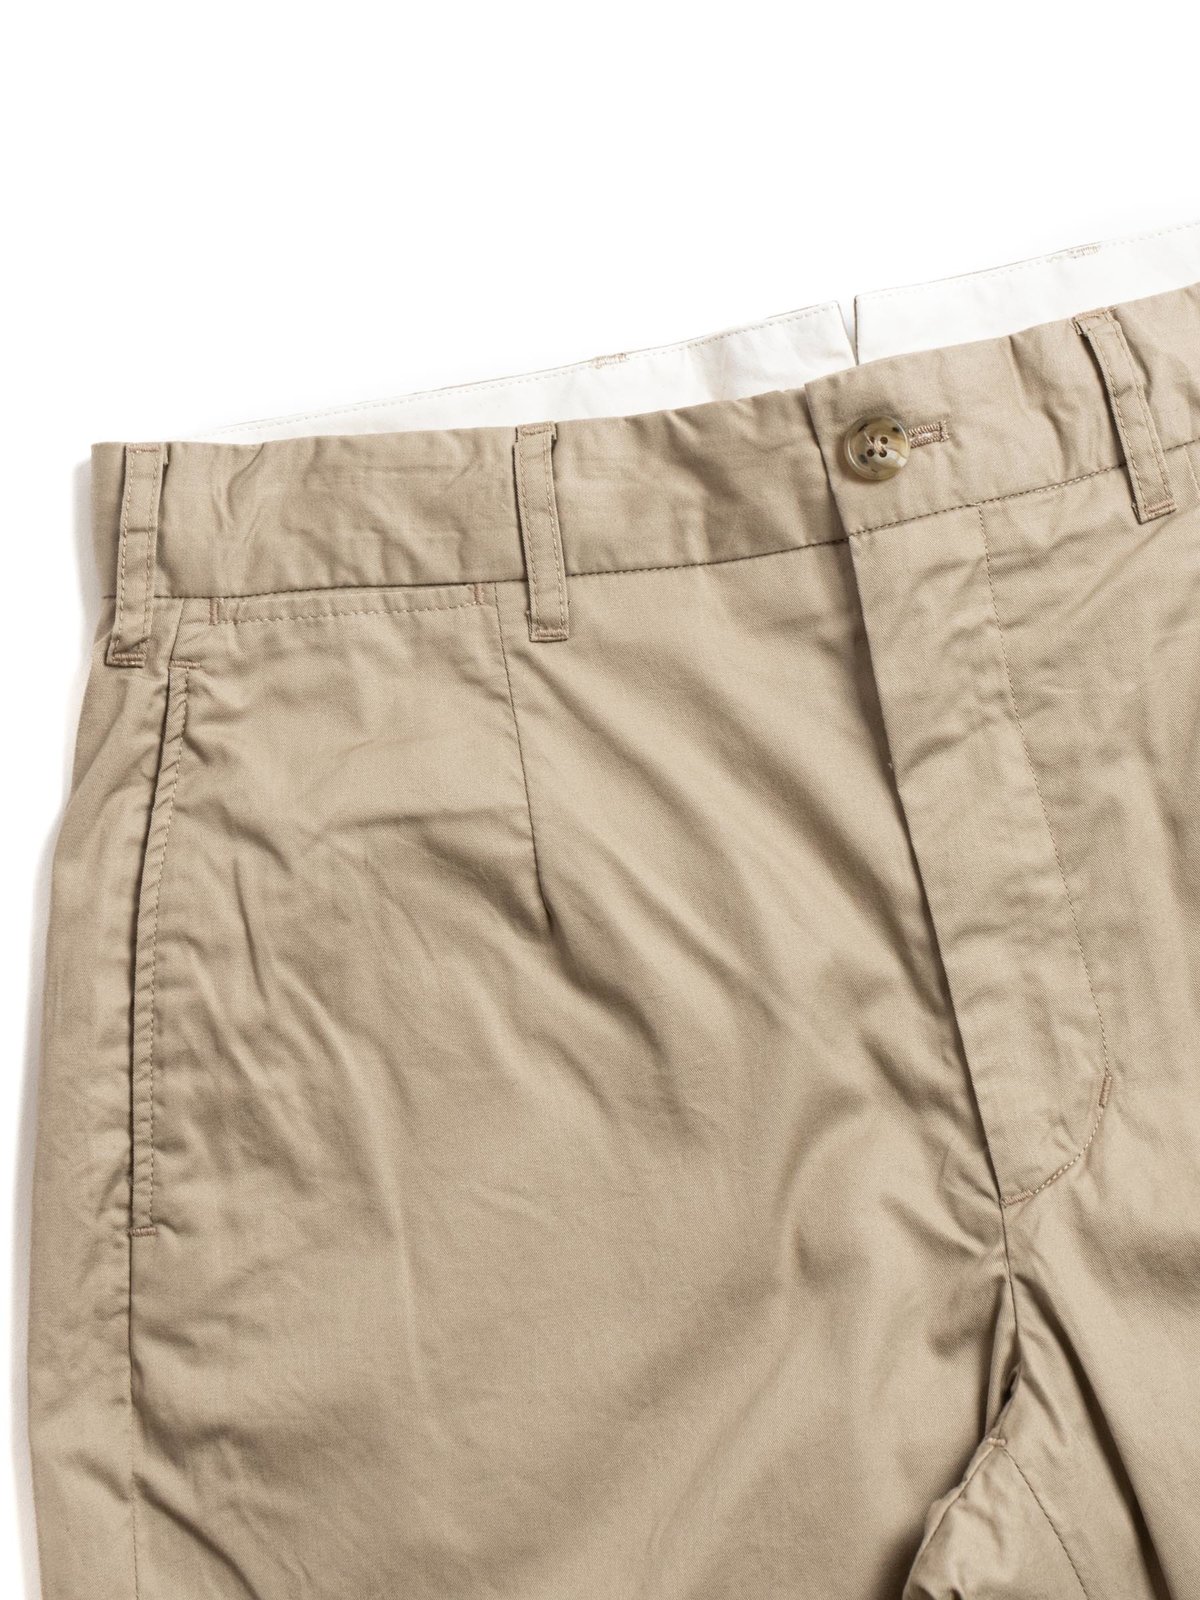 ANDOVER PANT KHAKI HIGH COUNT TWILL - Image 2